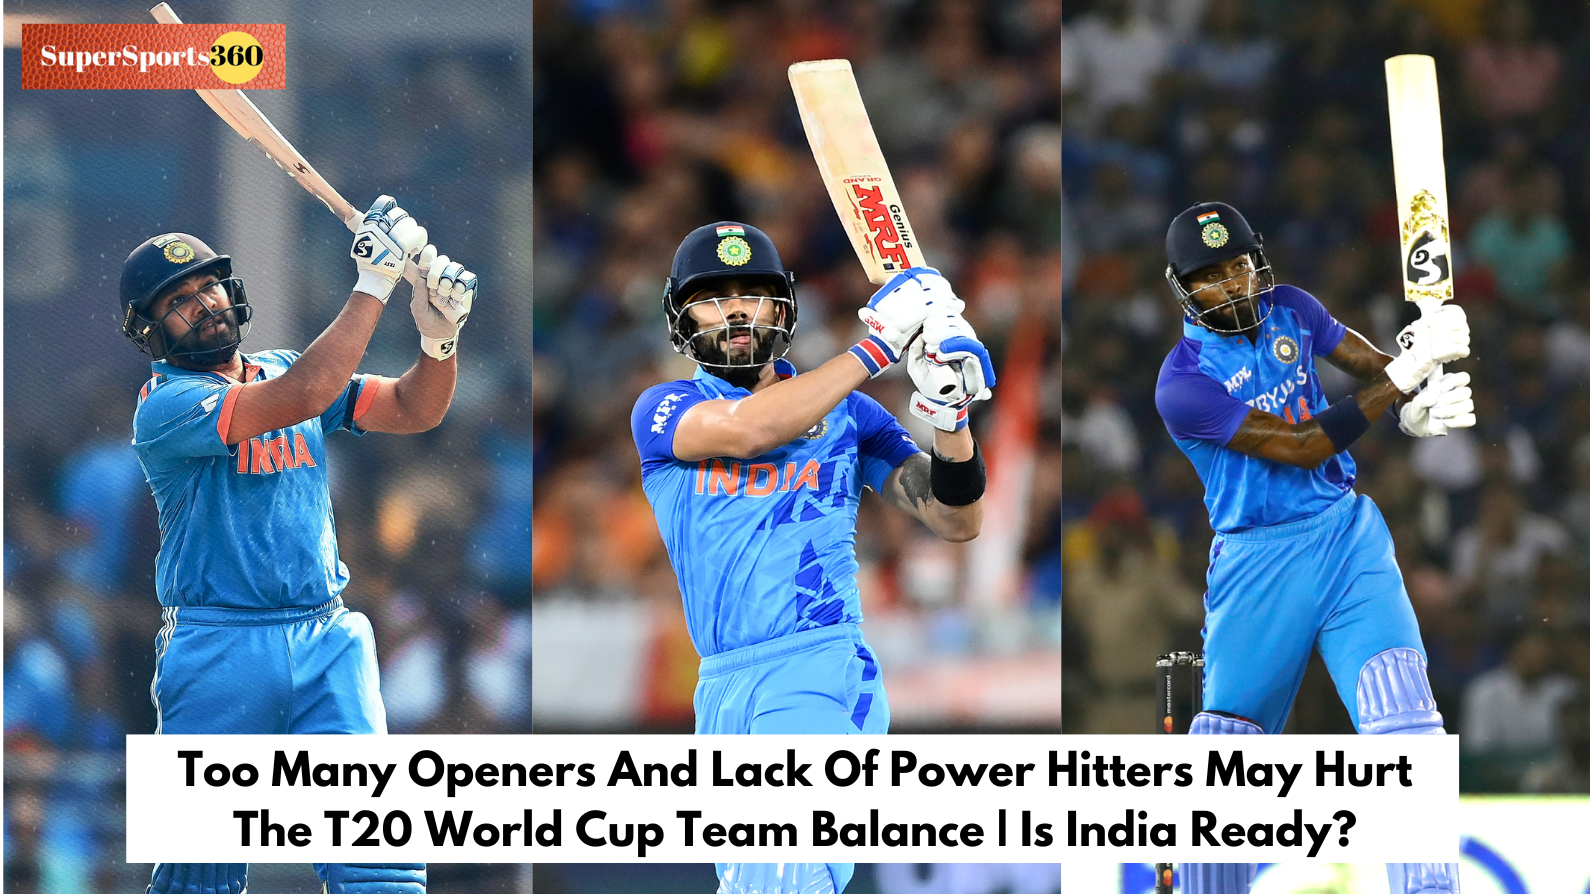 Too Many Openers And Lack Of Power Hitters May Hurt The T20 World Cup Team Balance | Is India Ready?